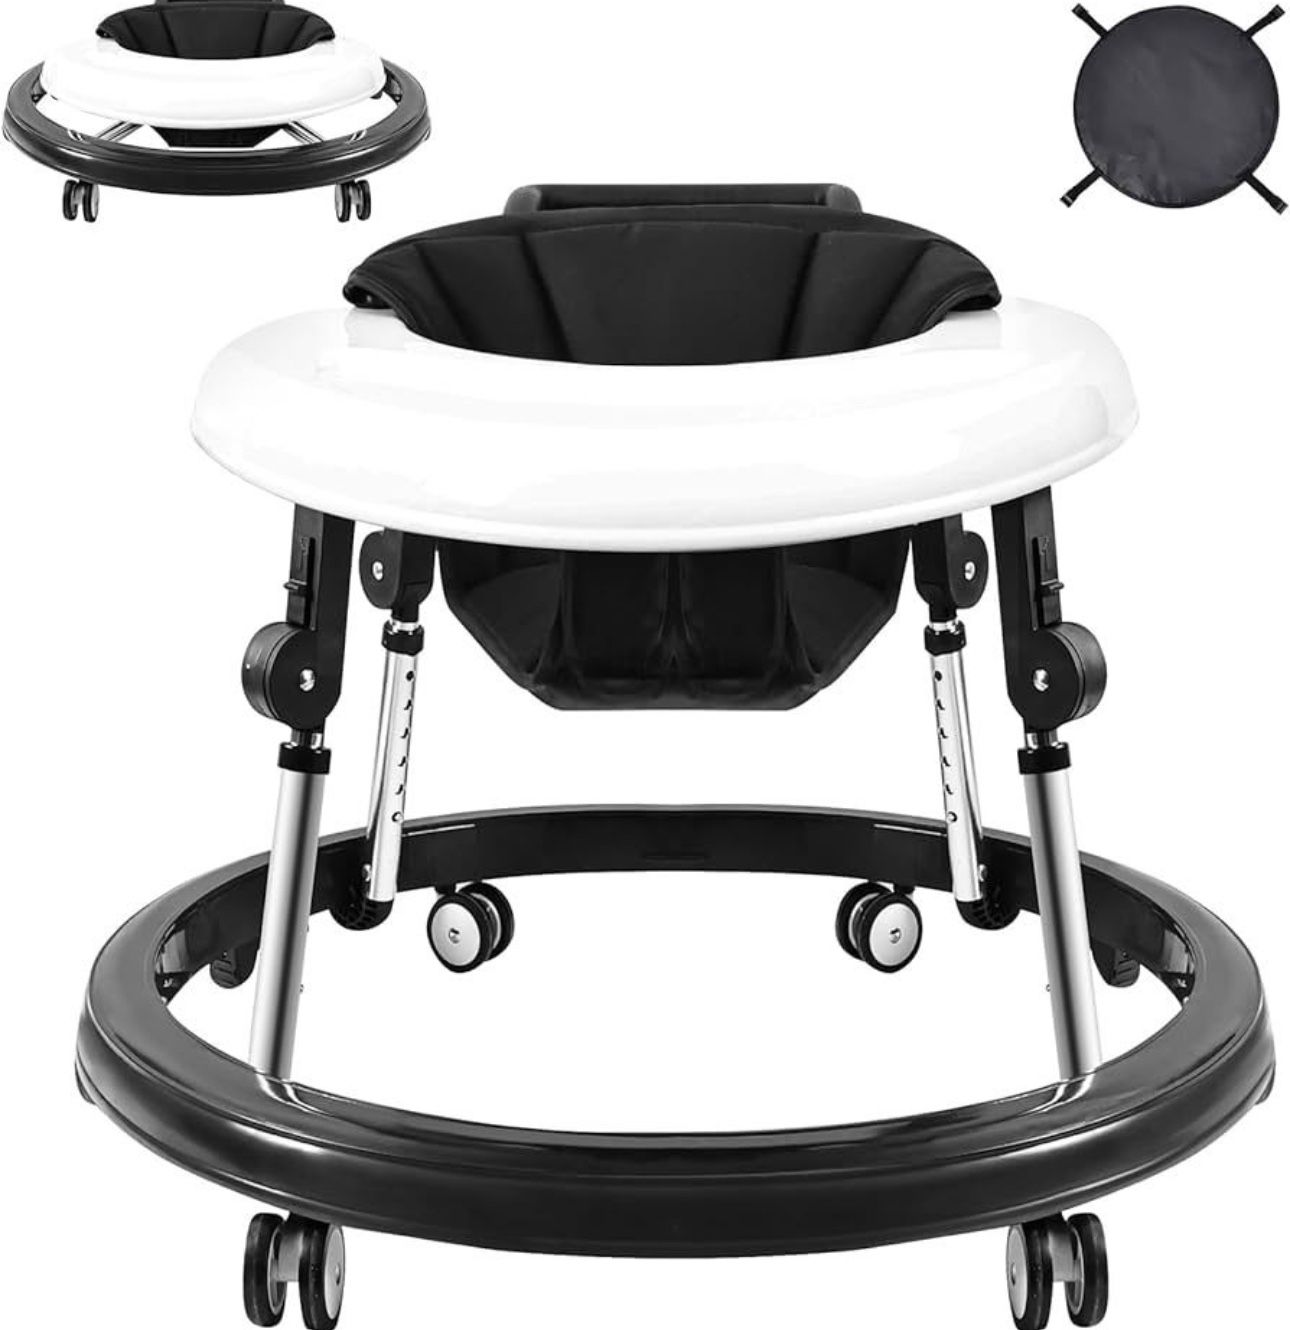 Harppa Baby Walker, Foldable 9-Gear Height Adjustable Baby Walker with Wheels, Infant Toddler Walker with Foot Pads, Anti-Fall Baby Walkers and Activi